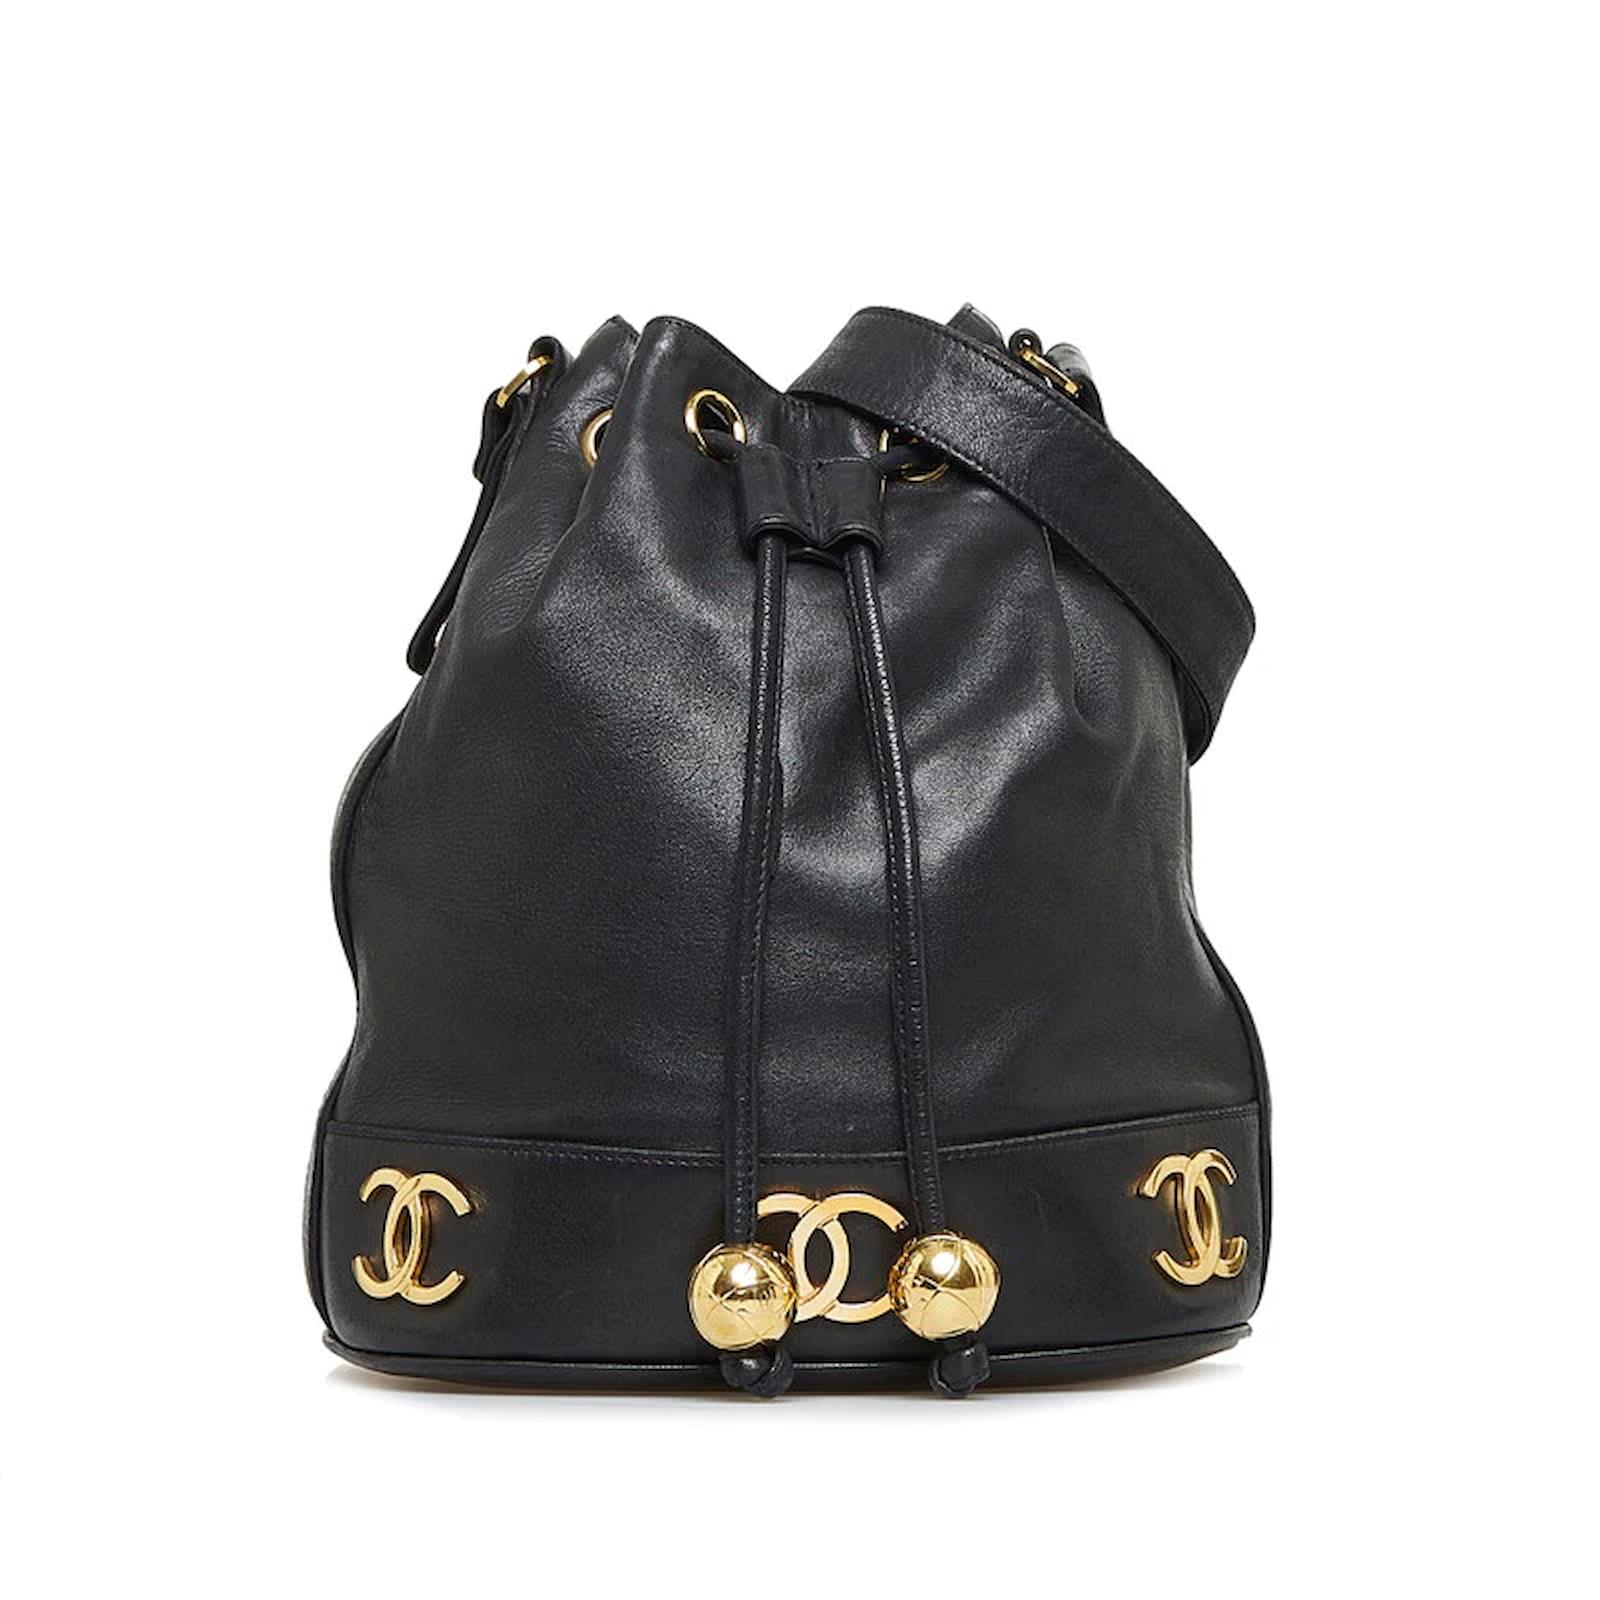 Chanel Patent Leather Bucket Bag